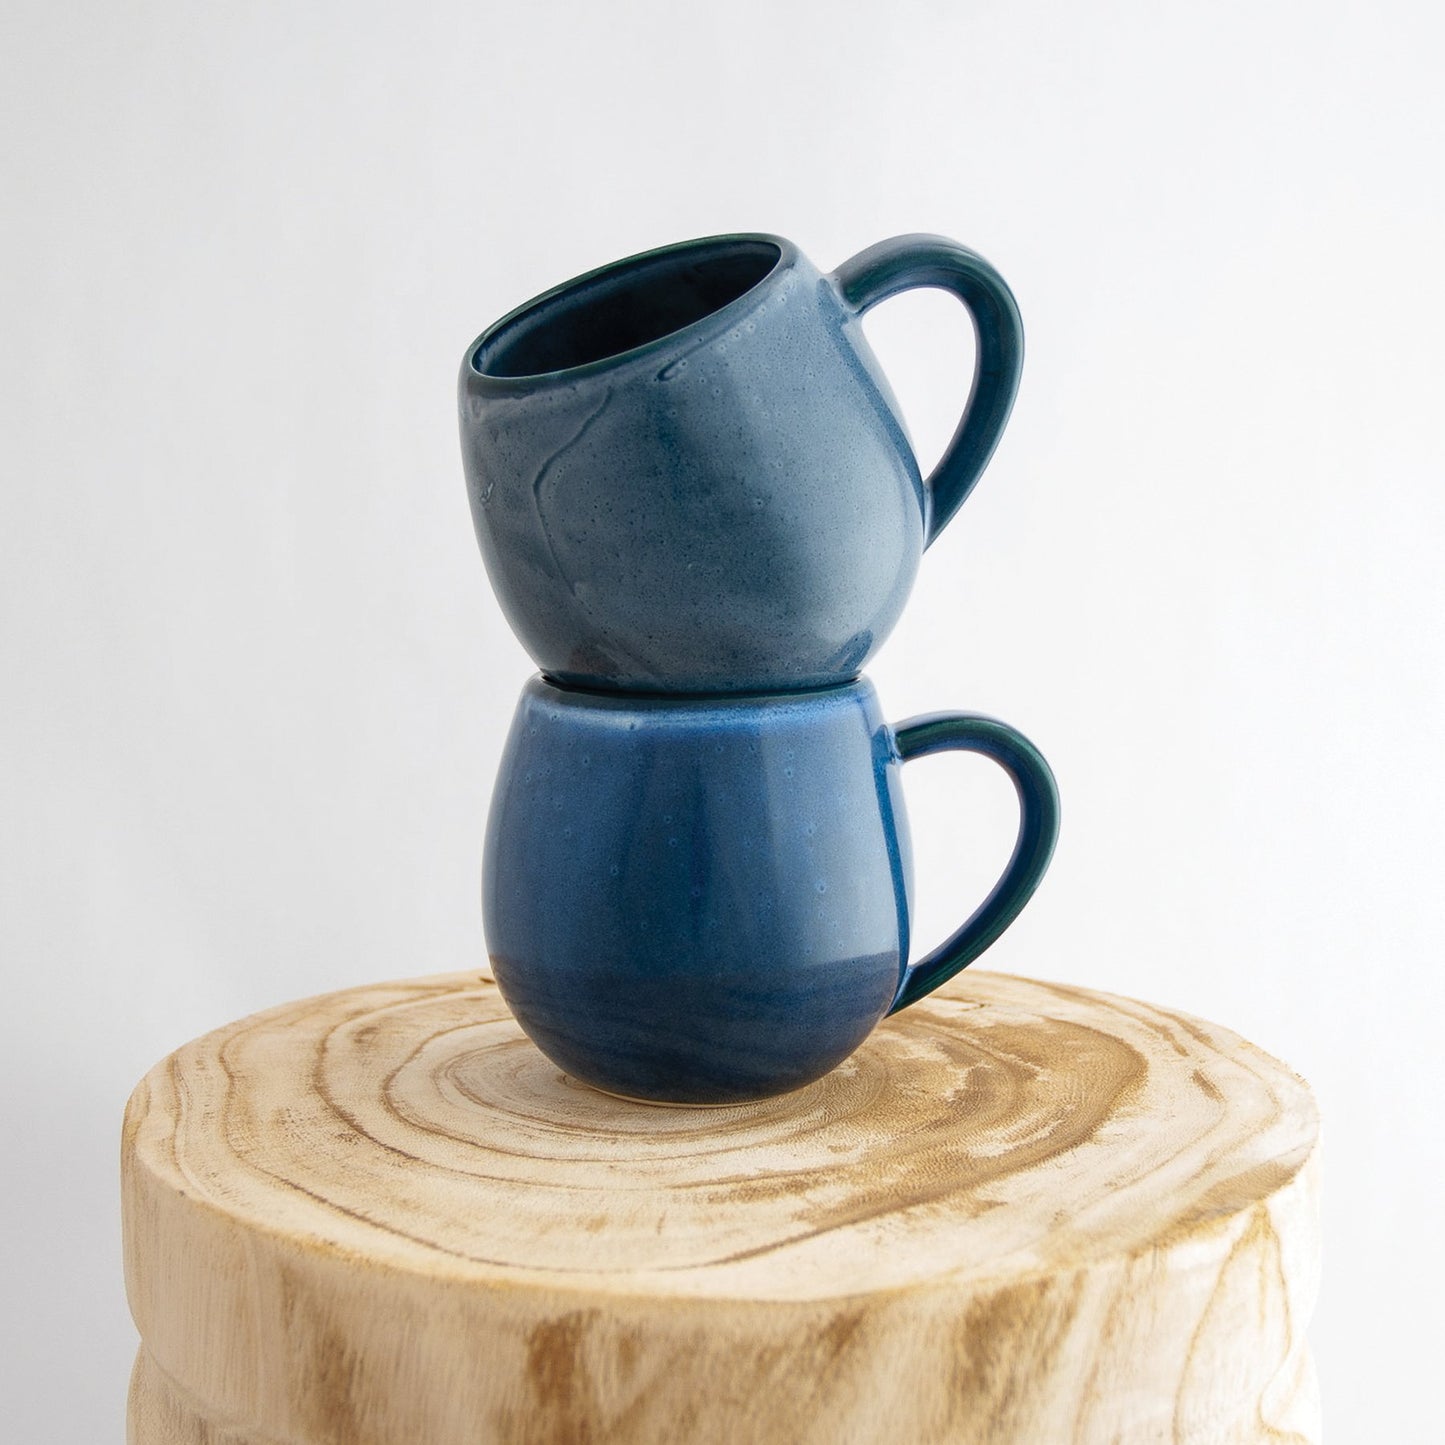 Two Robert Gordon dark topaz blue canvas mugs stacked on a natural wooden round side table